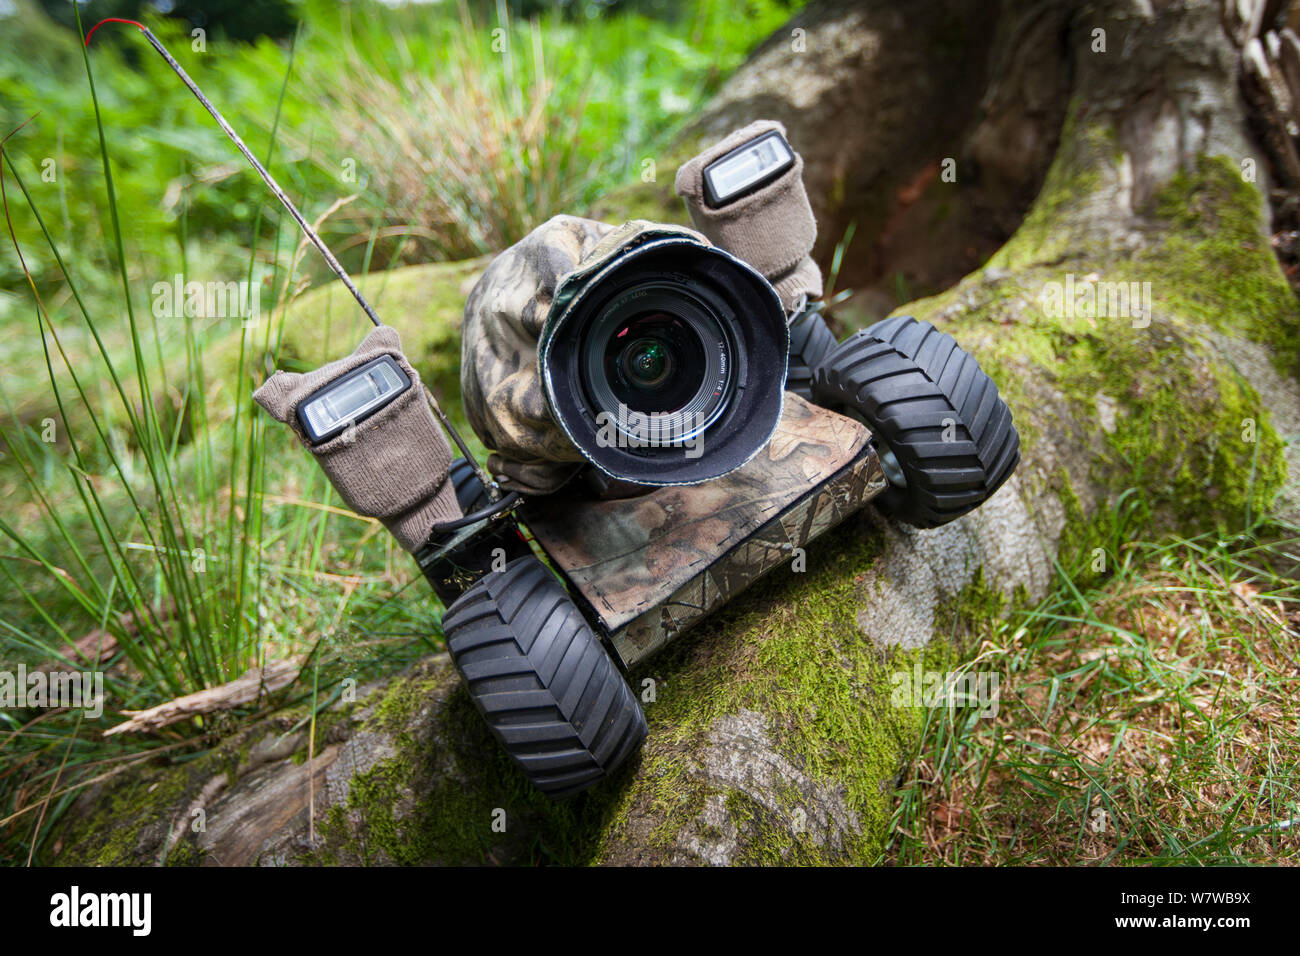 Beetle cam, remote controlled camera buggy set up on tree roots. Stock Photo